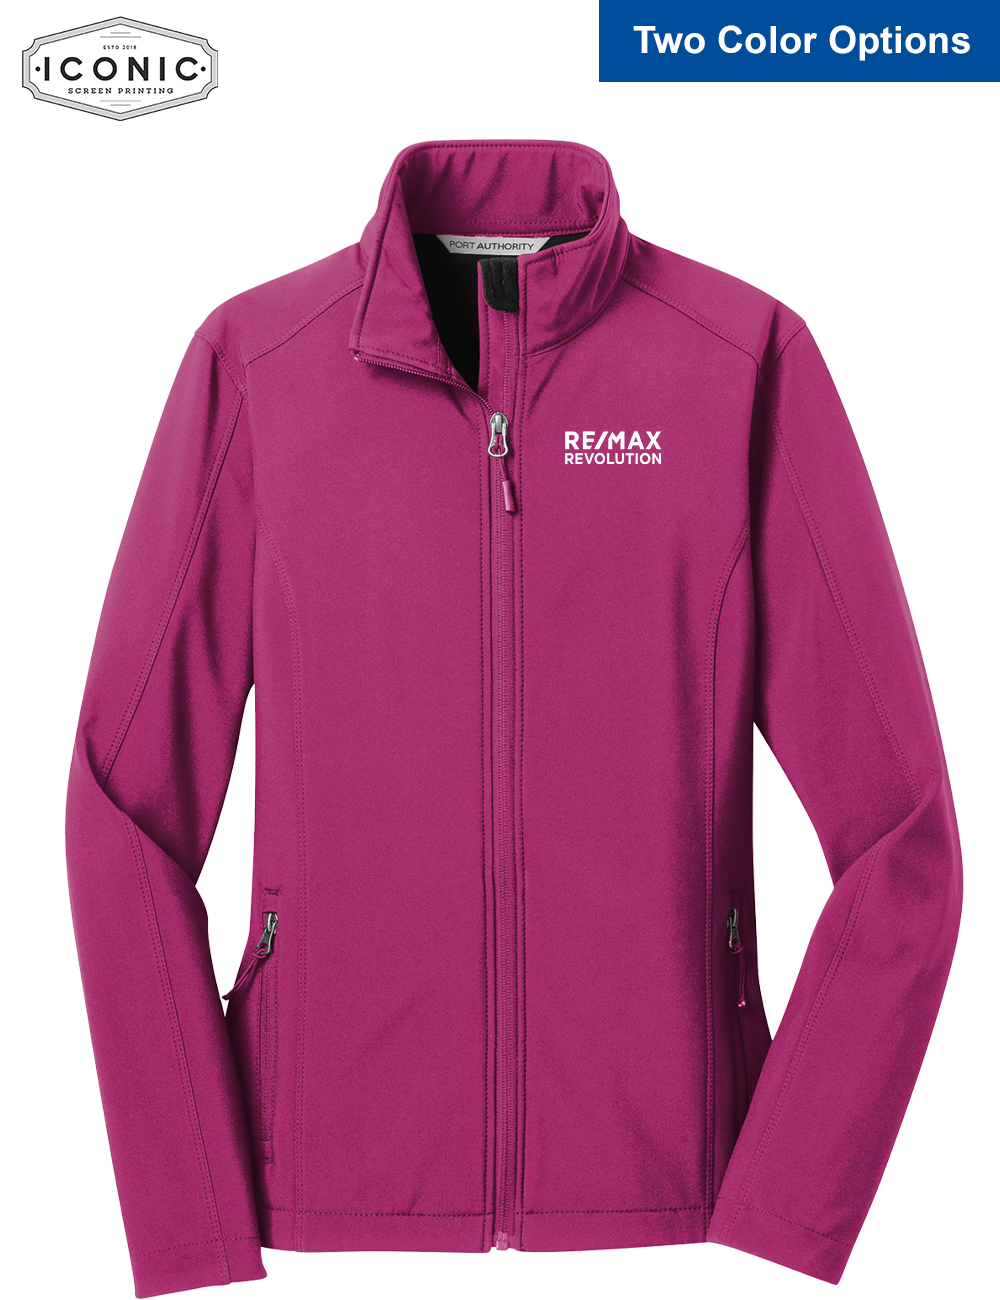 Ladies softshell jackets printed and embroidered